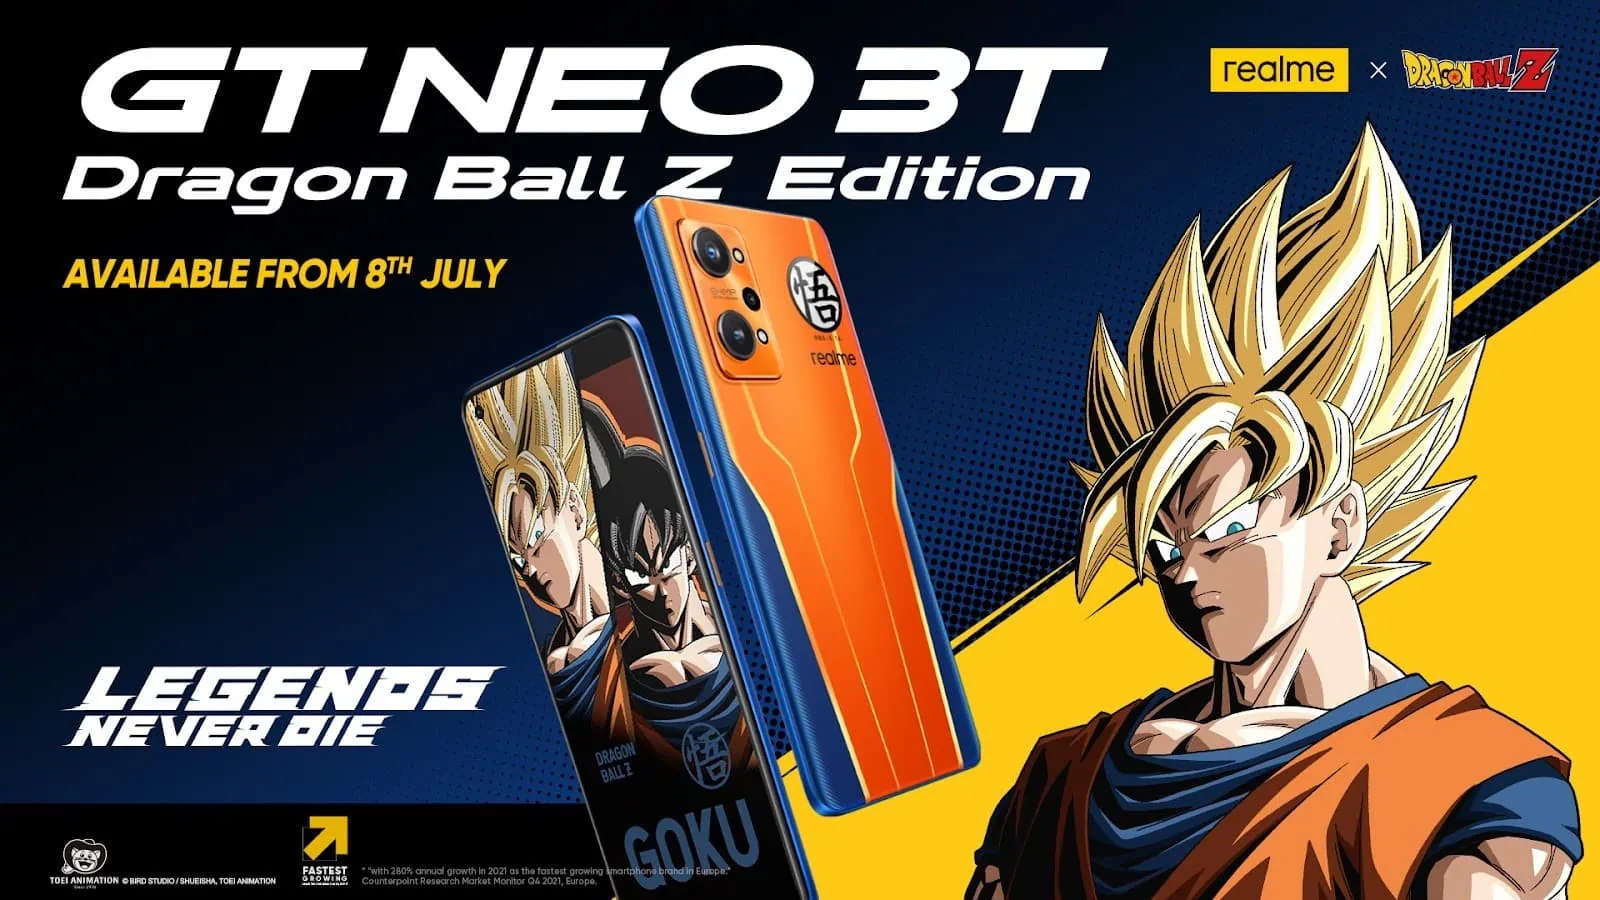 Realme GT NEO 3T Dragon Ball Z Edition is available to buy now for €499.99 (not for sale in the UK)